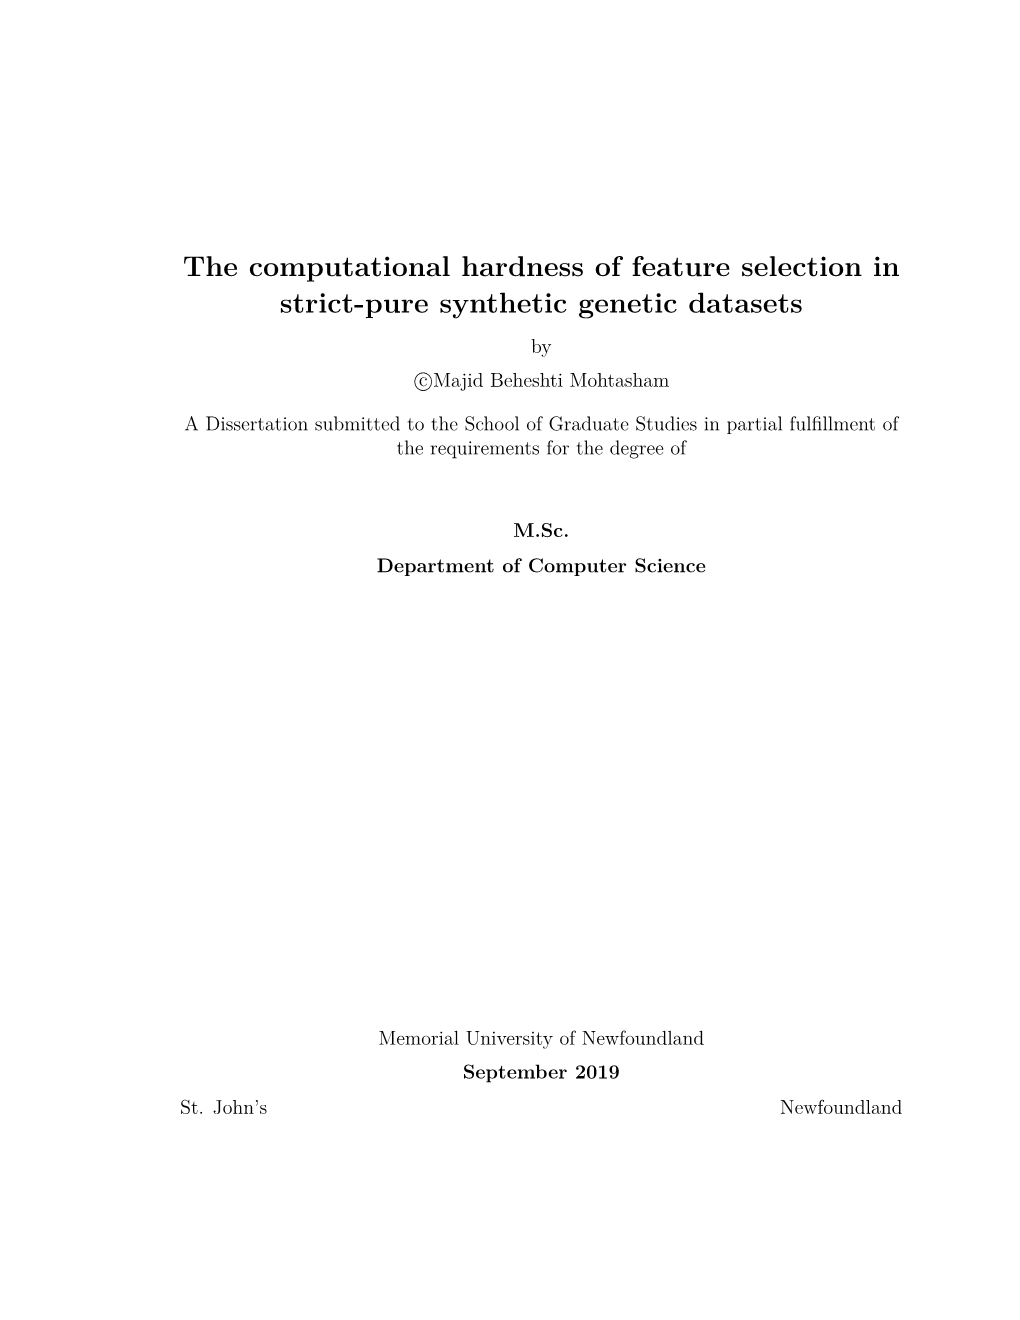 The Computational Hardness of Feature Selection in Strict-Pure Synthetic Genetic Datasets by C Majid Beheshti Mohtasham